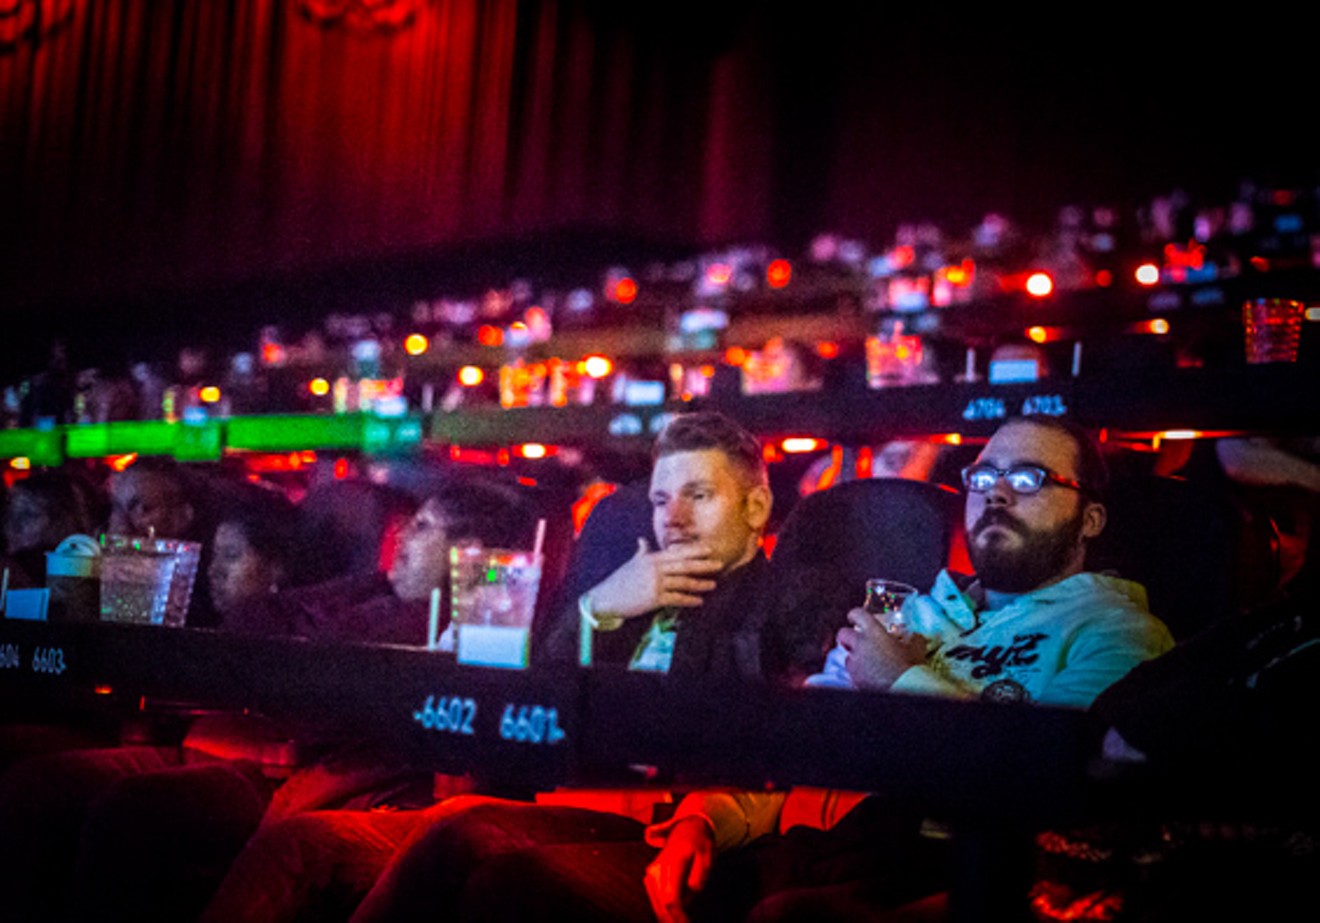 Guests at the Alamo Drafthouse Richardson watch the special previews before a screening of Peter Jackson's The Hobbit shortly after the theater's official opening in 2013.